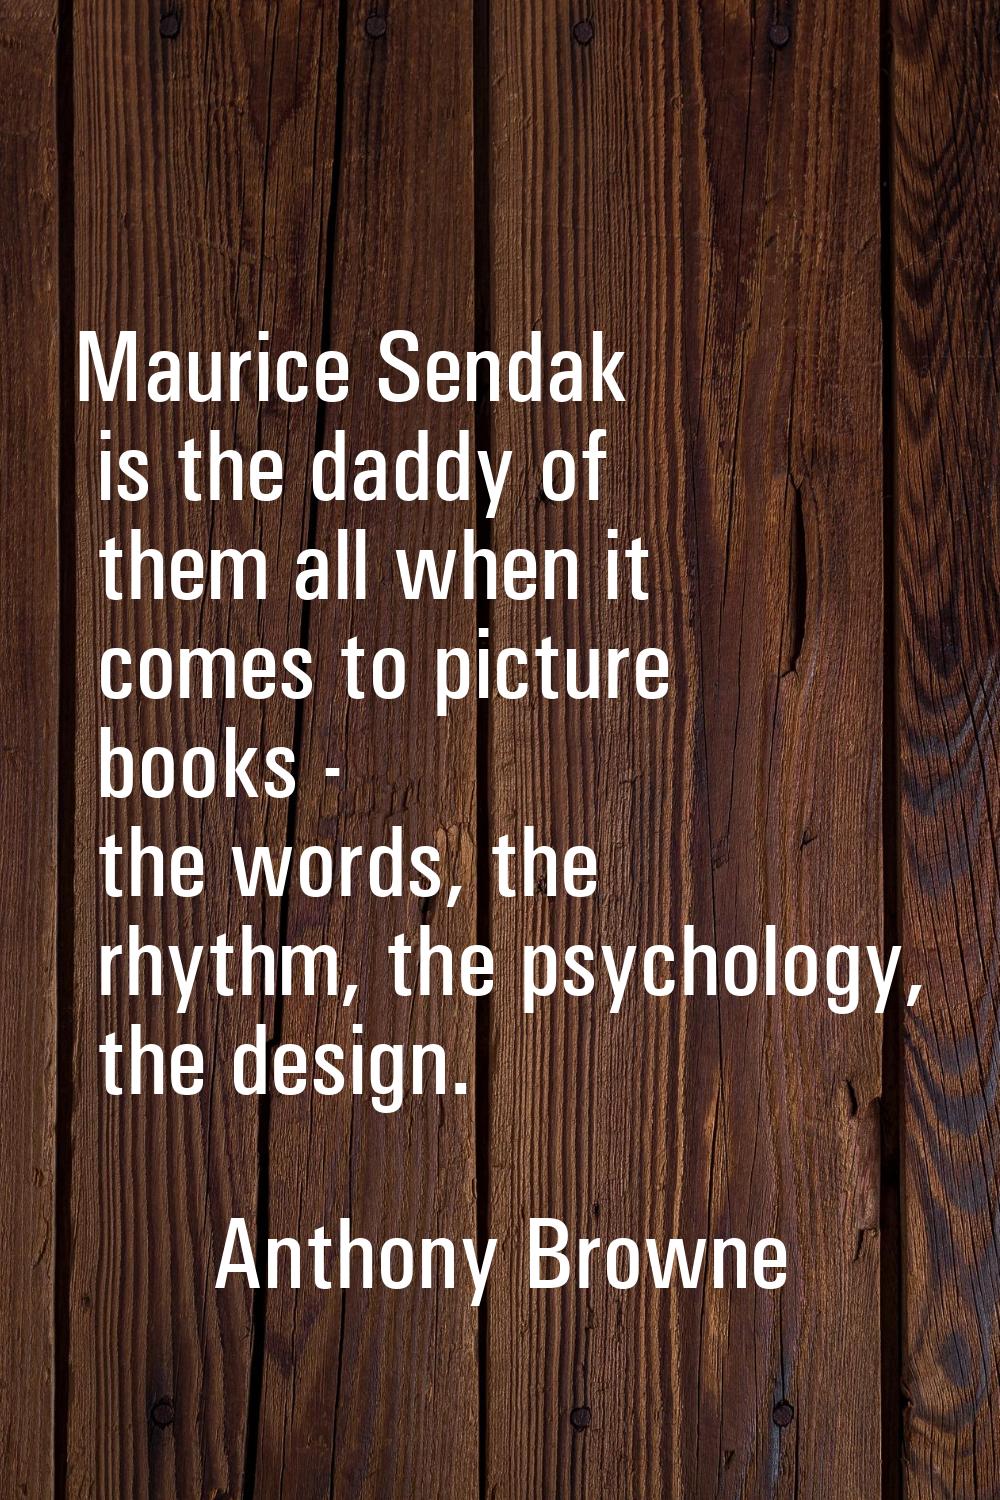 Maurice Sendak is the daddy of them all when it comes to picture books - the words, the rhythm, the